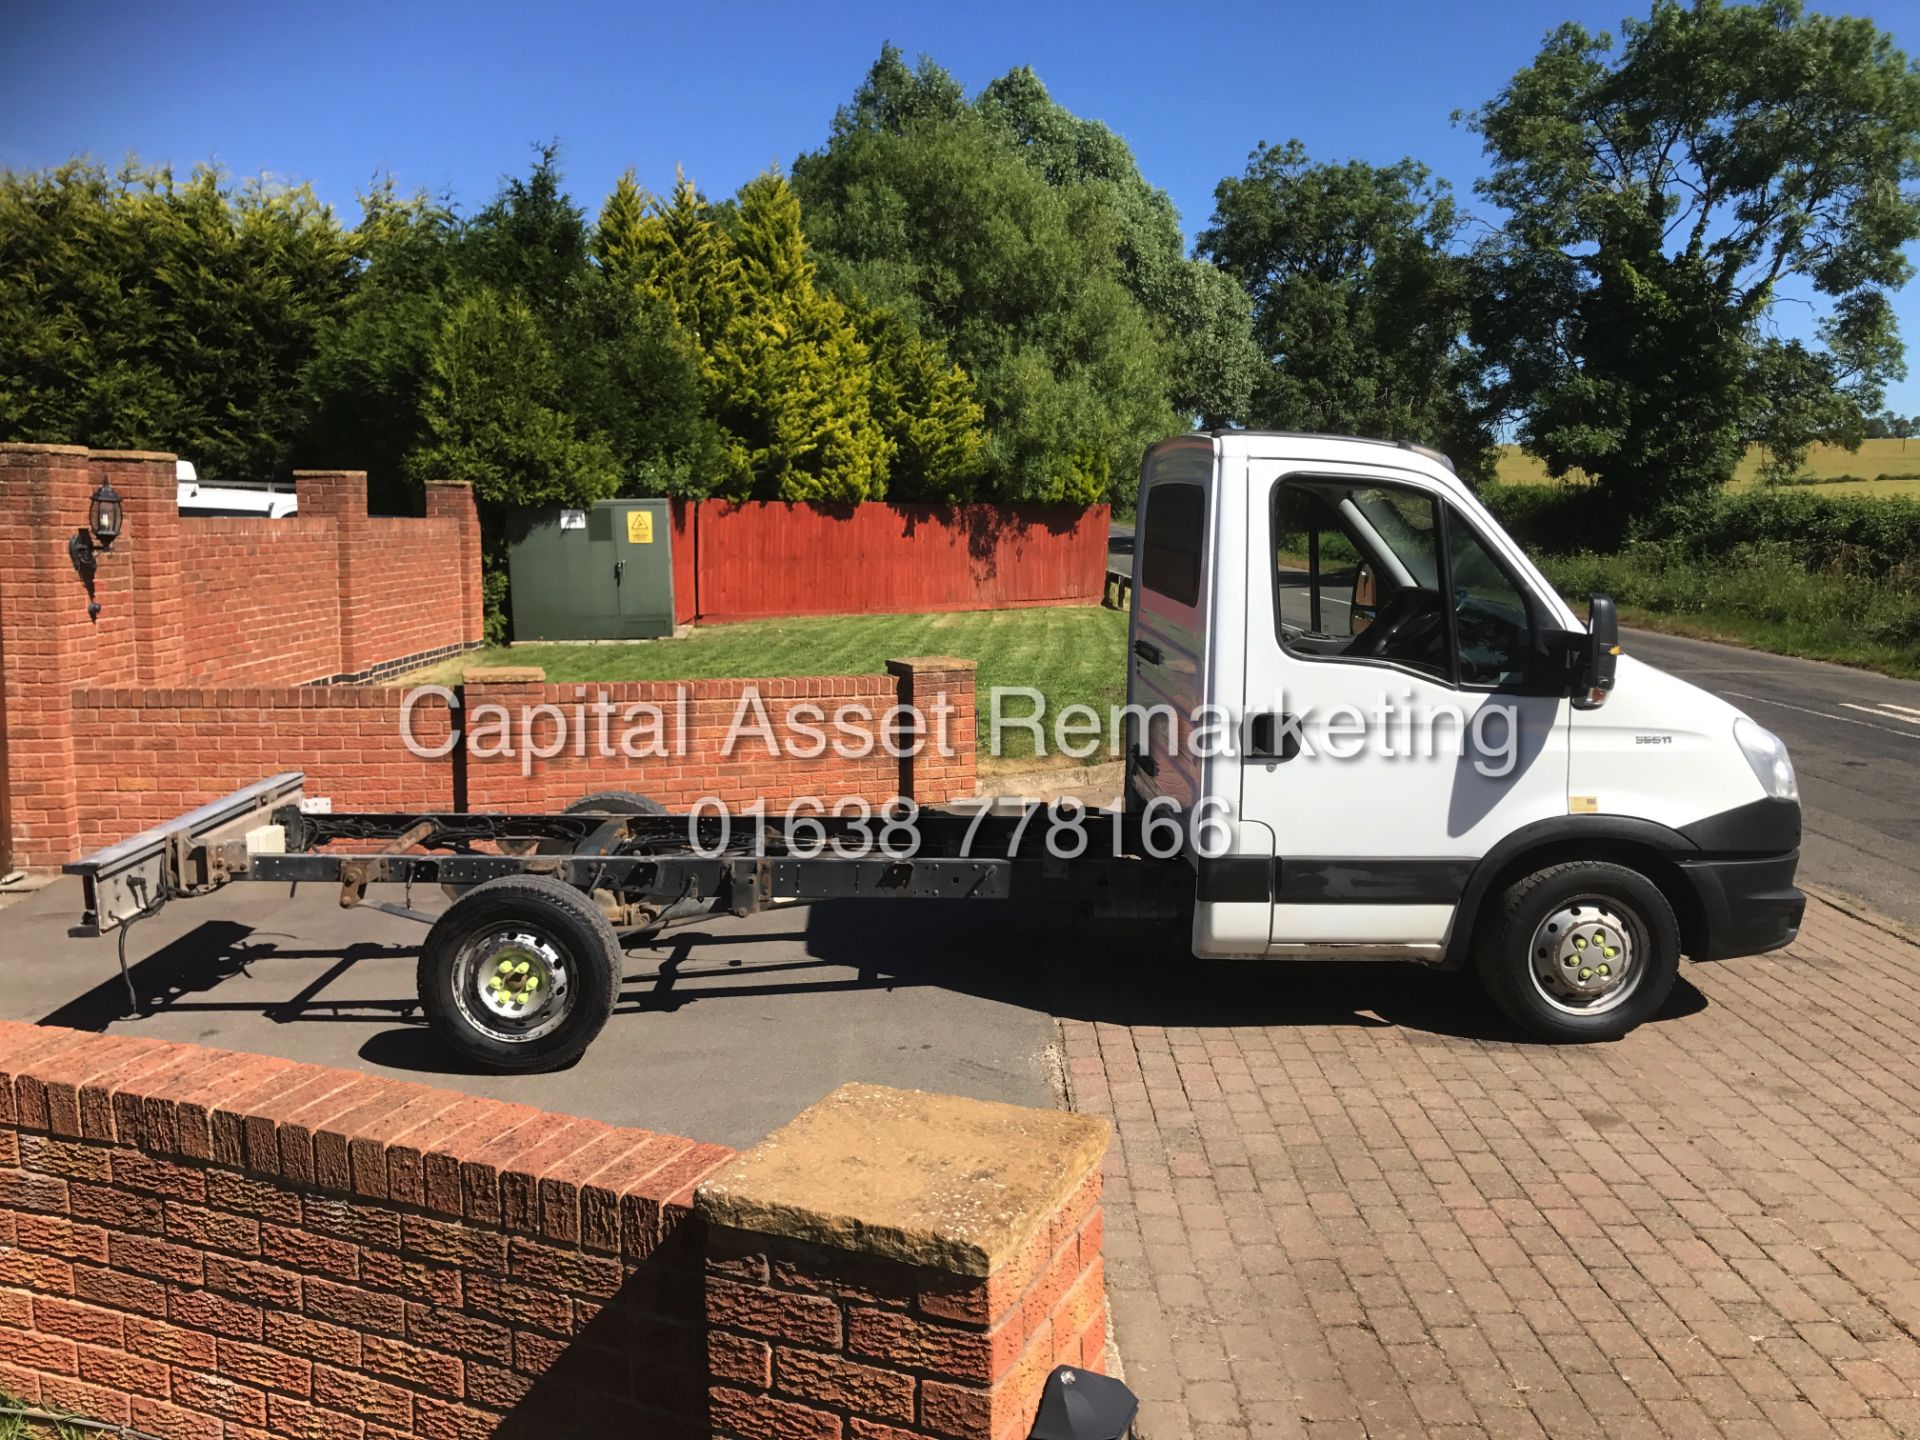 IVECO DAILY LONG WHEEL BASE TRUCK - CAB & CHASSIS - 63 REG - IDEAL RECOVERY VEHICLE / SCAFFOLDING